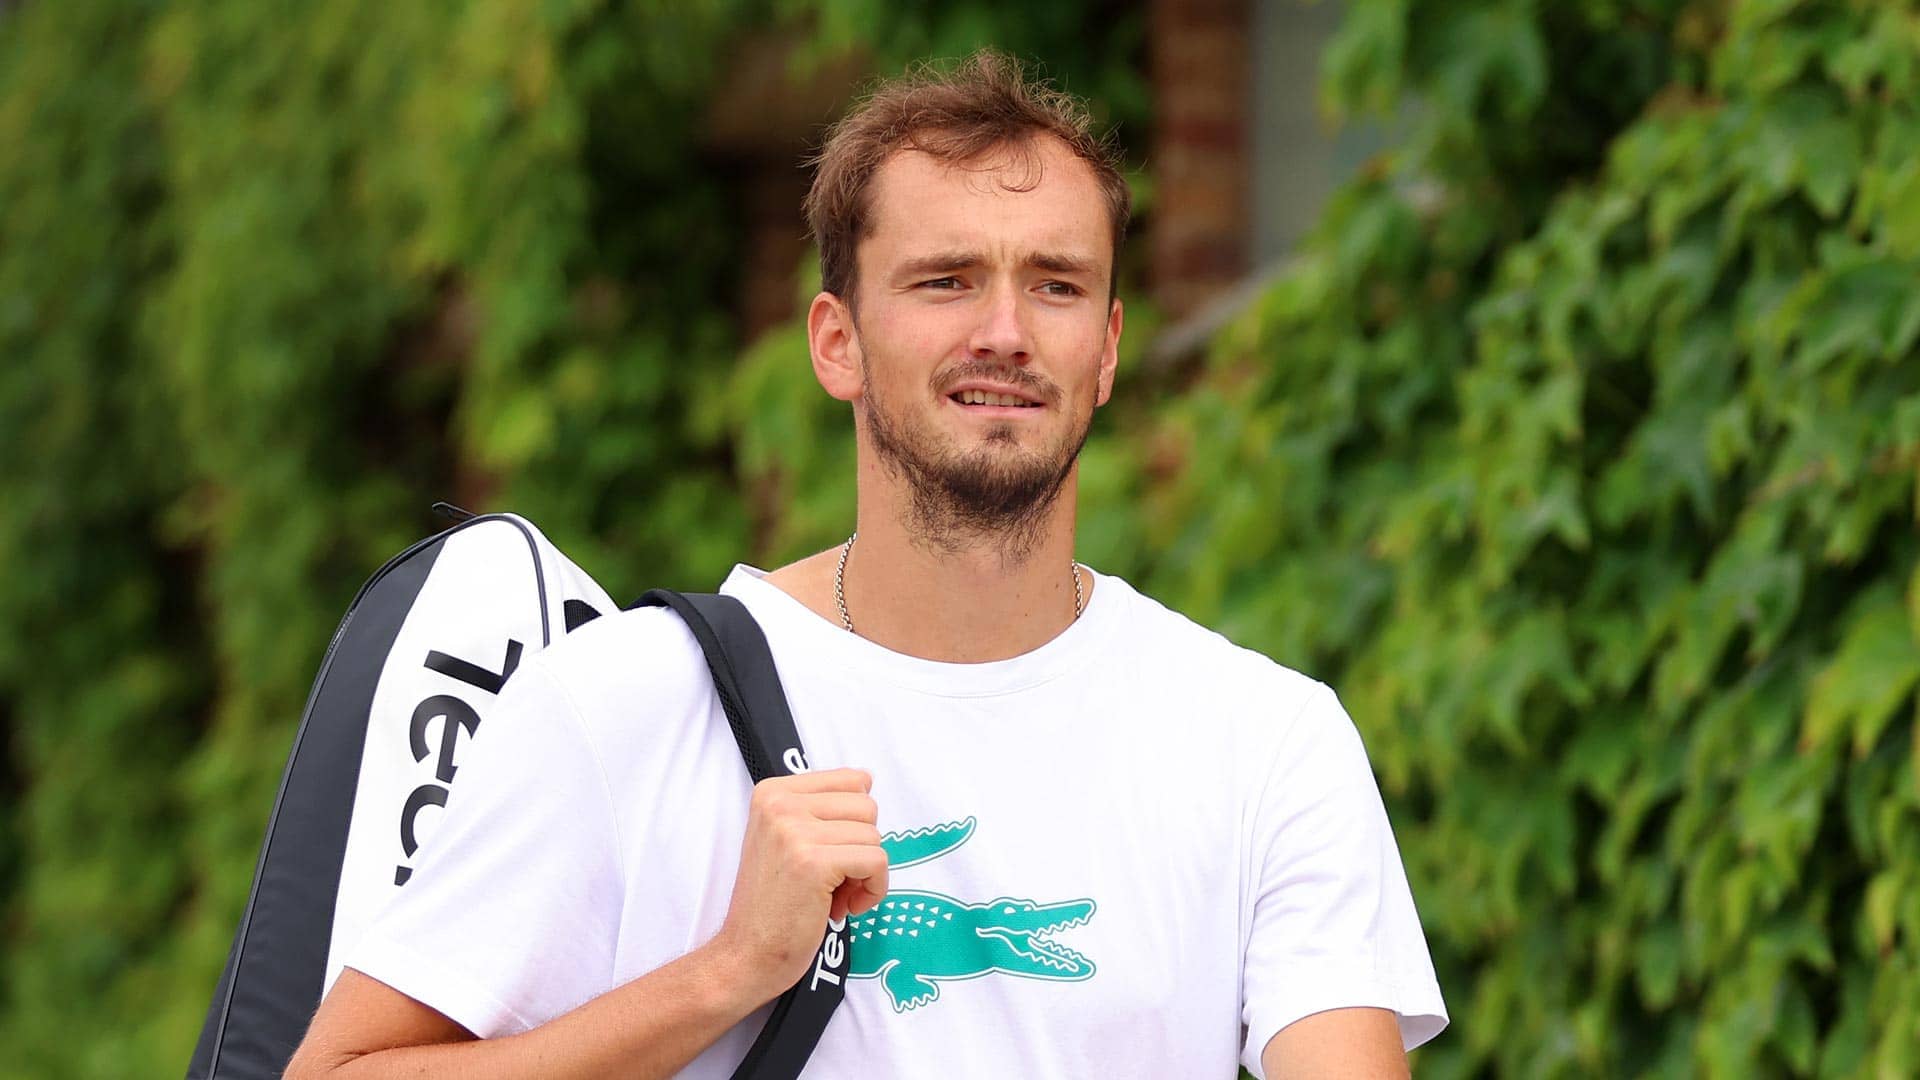 Daniil Medvedev holds a 35-19 record in tour-level matches on grass.